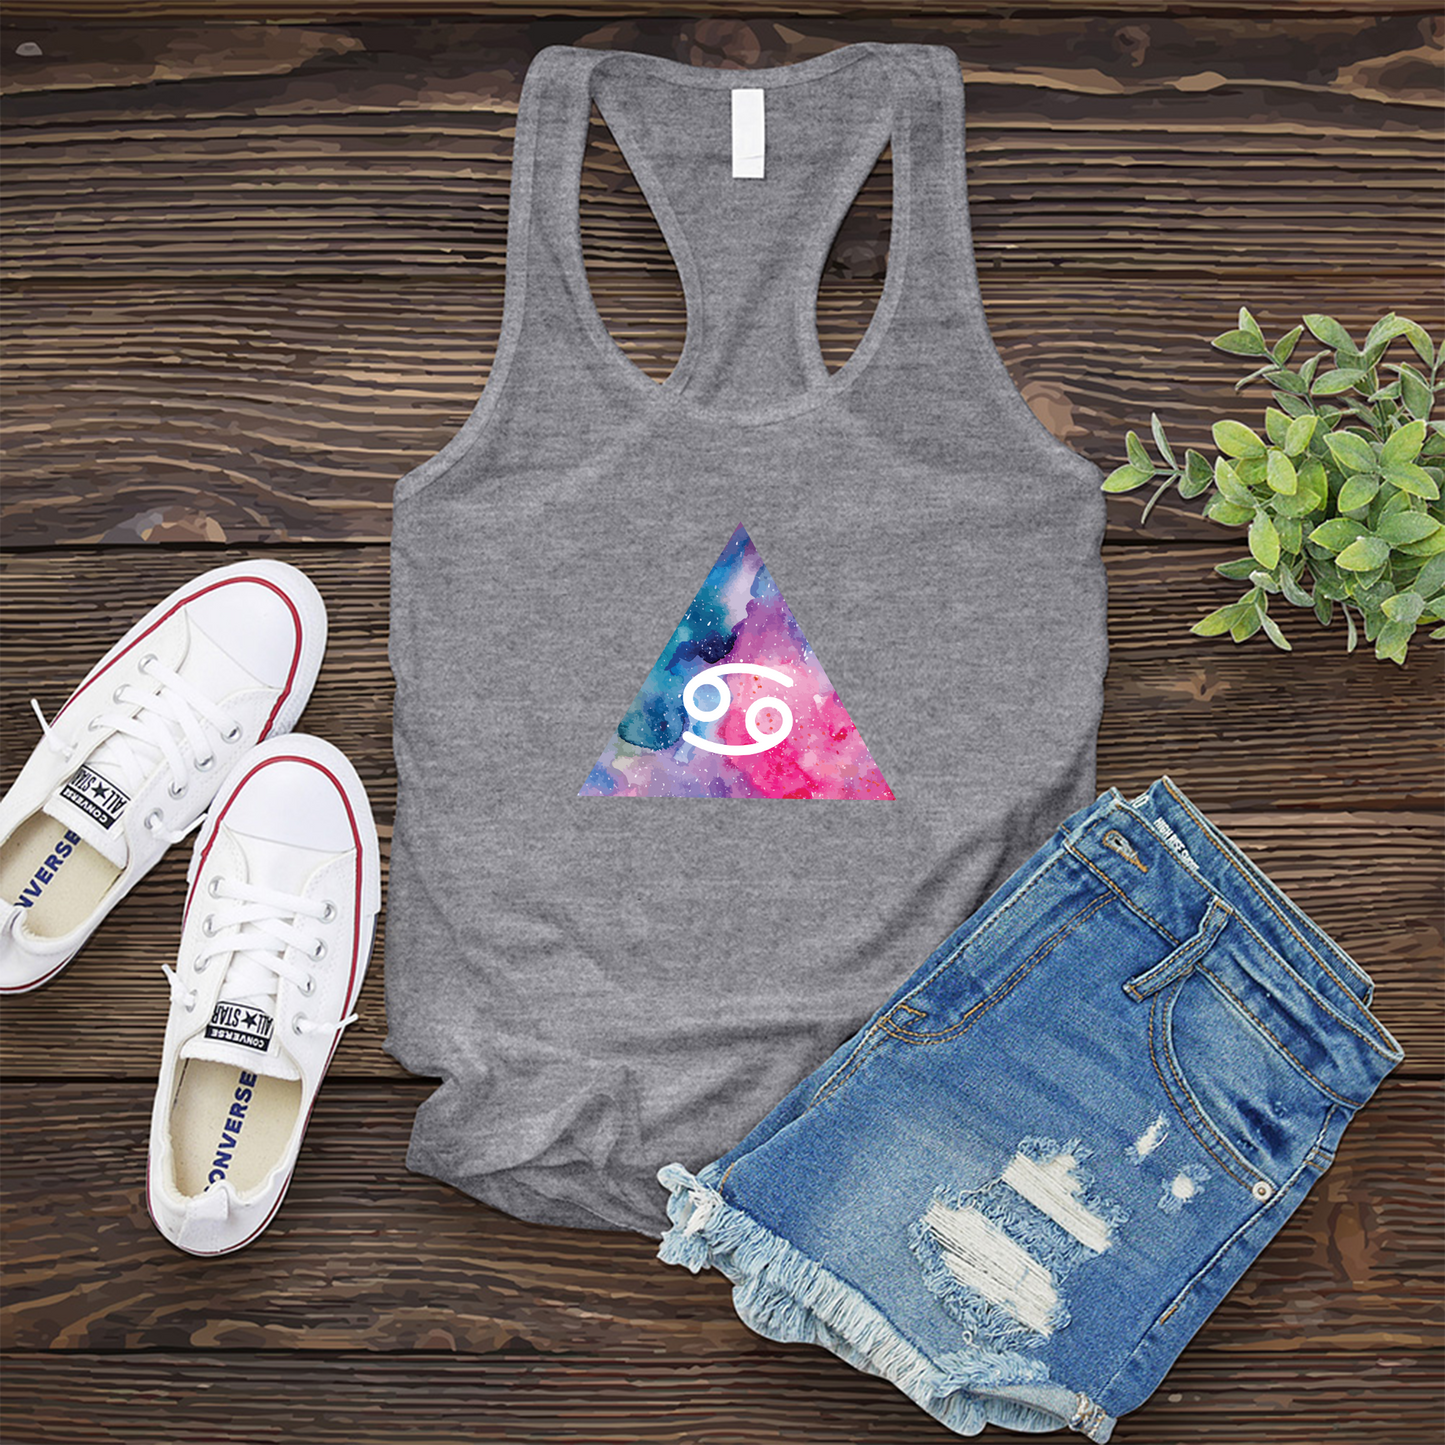 Colorful Cancer Symbol Triangle Women's Tank Top